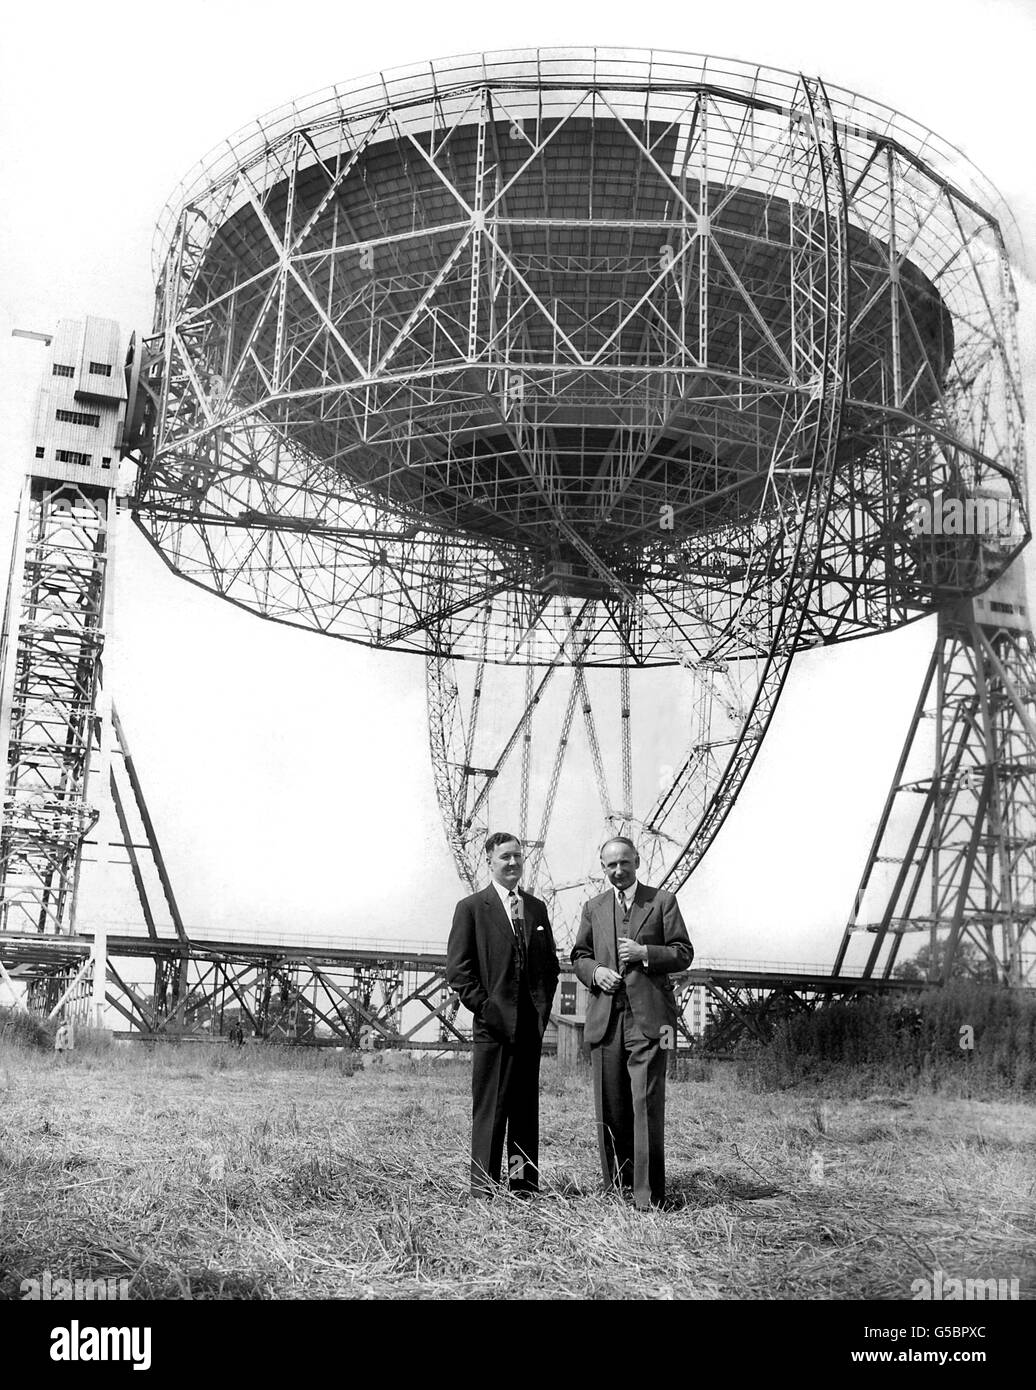 Professor Bernard Lovell (r), who will be director of the Jodrell Bank establishment, and Mr H.C. Husband, the consulting engineer who designed and constructed the huge radio telescope. Stock Photo